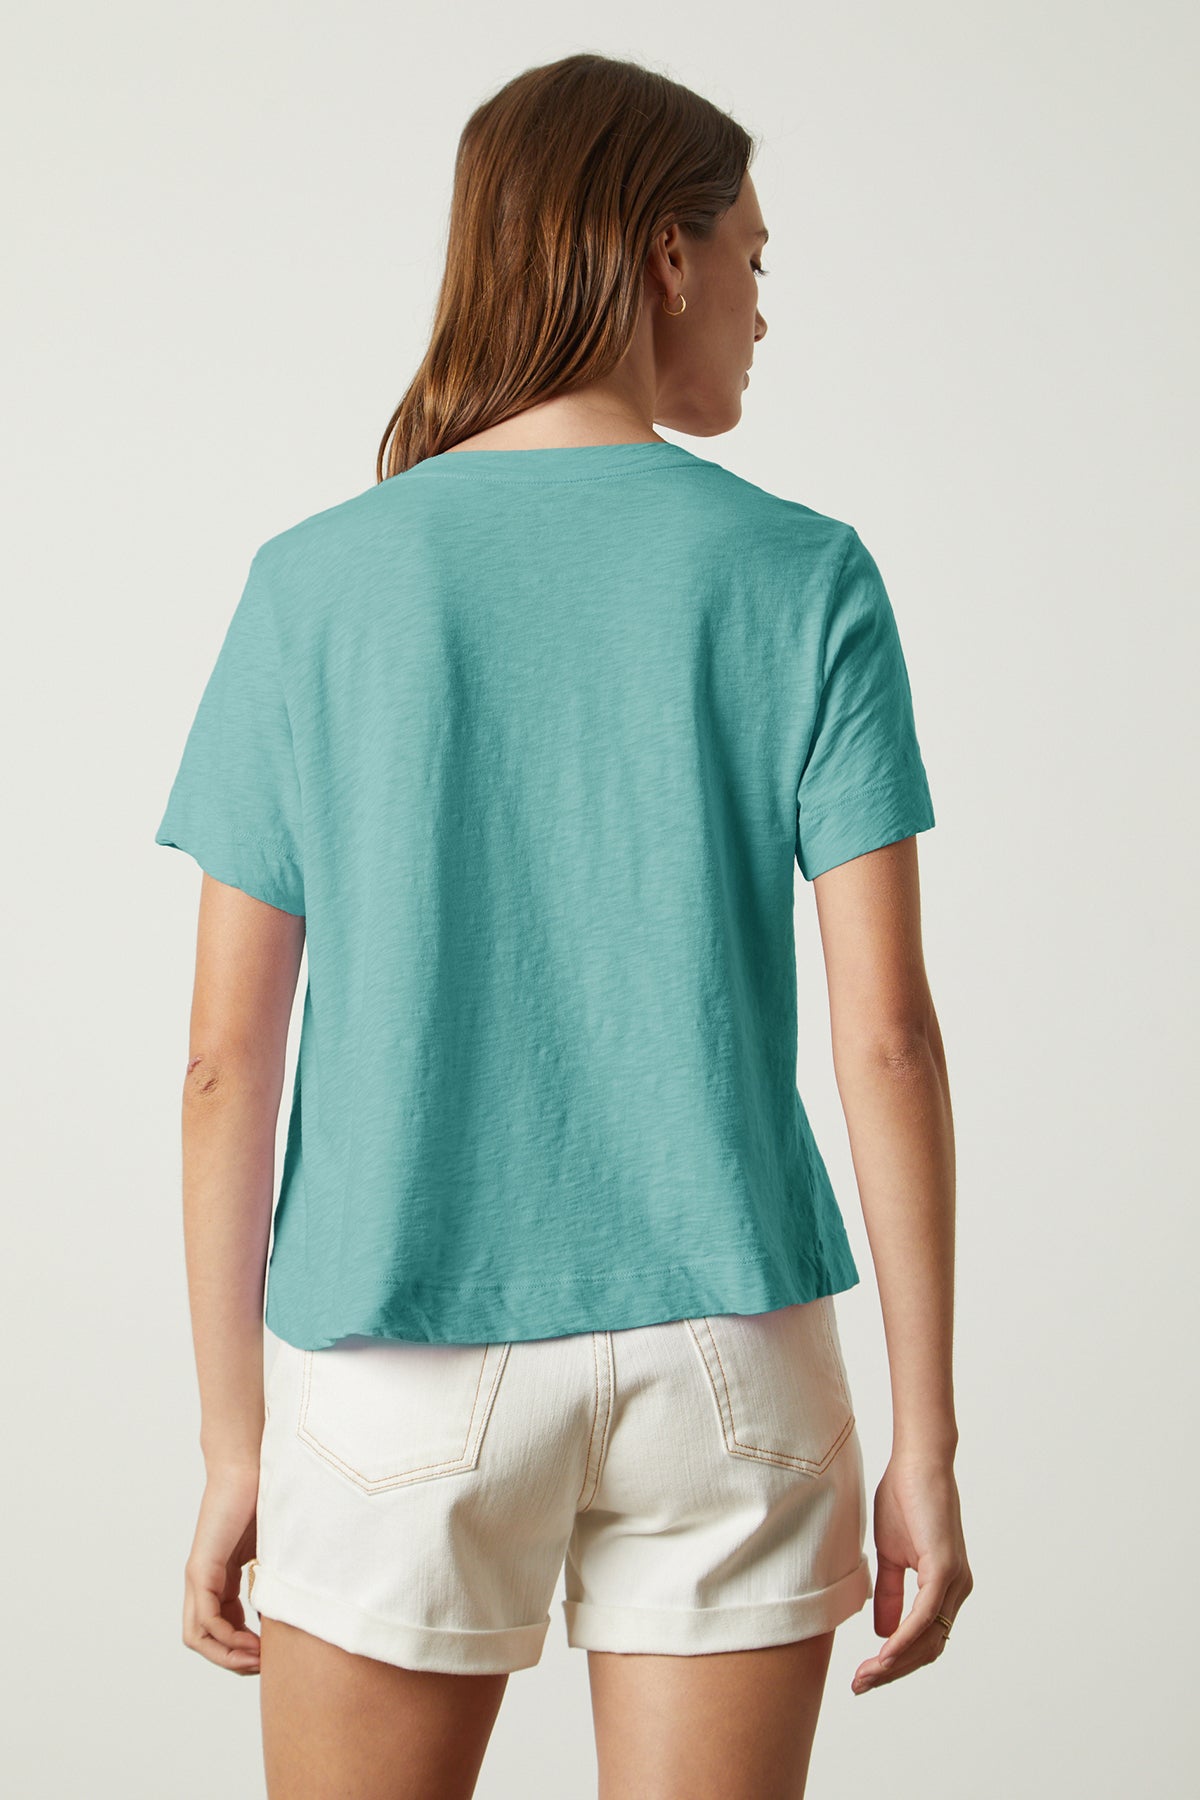 The back view of a woman wearing a Velvet by Graham & Spencer LULA COTTON SLUB SWING TEE and white shorts.-35206647152833